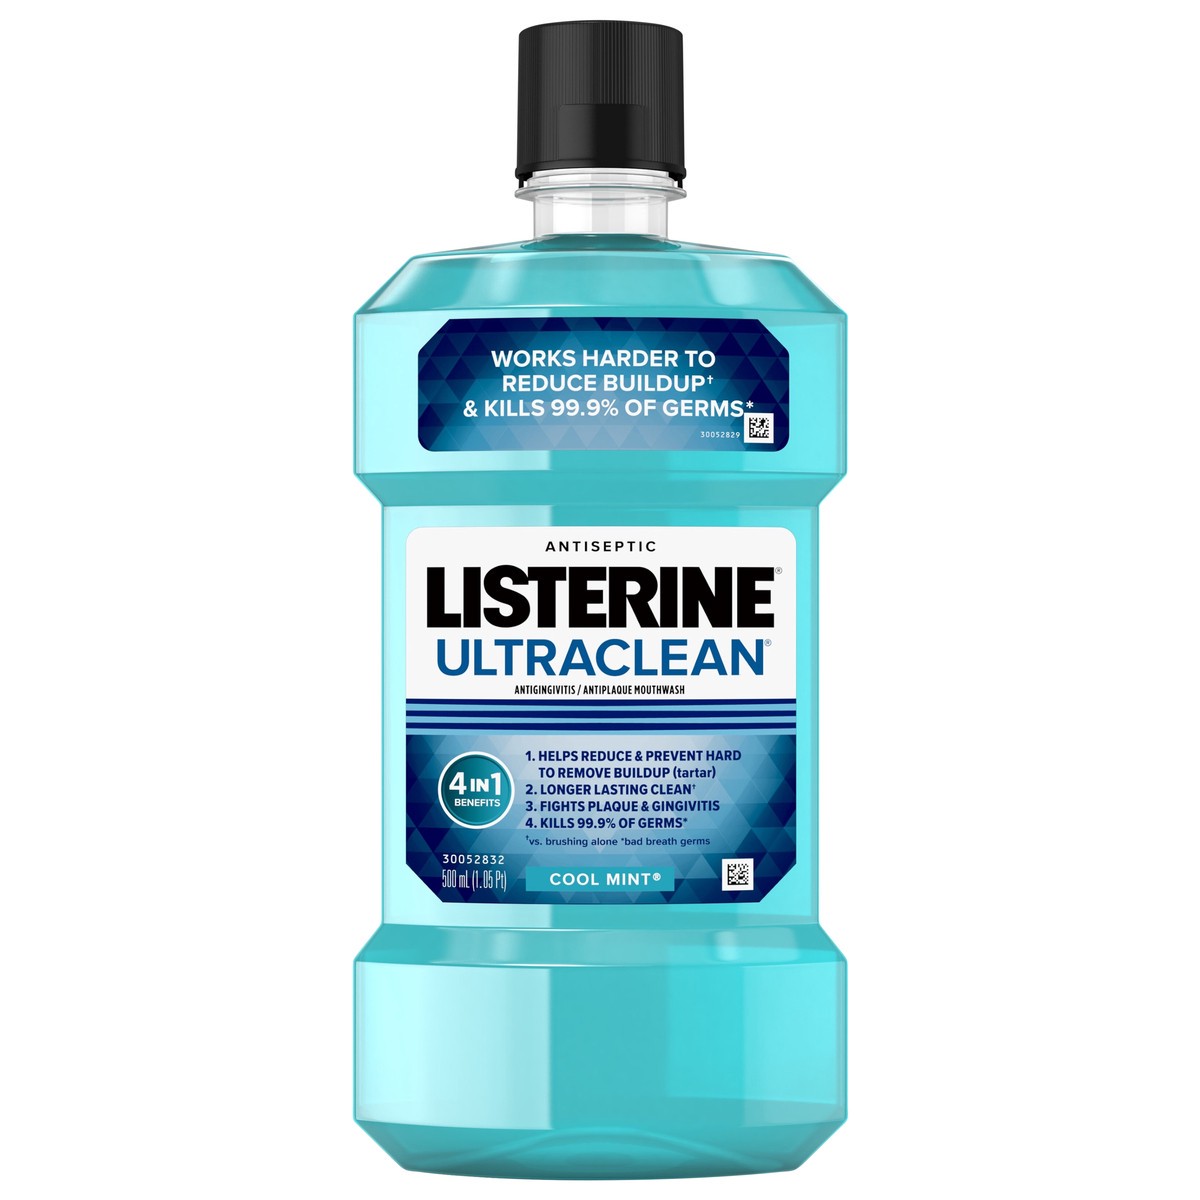 slide 1 of 10, Listerine Ultraclean Oral Care Antiseptic Mouthwash, Everfresh Technology to Help Fight Bad Breath, Gingivitis, Plaque & Tartar, ADA-Accepted Tartar Control Oral Rinse, Cool Mint, 500 mL, 500 ml